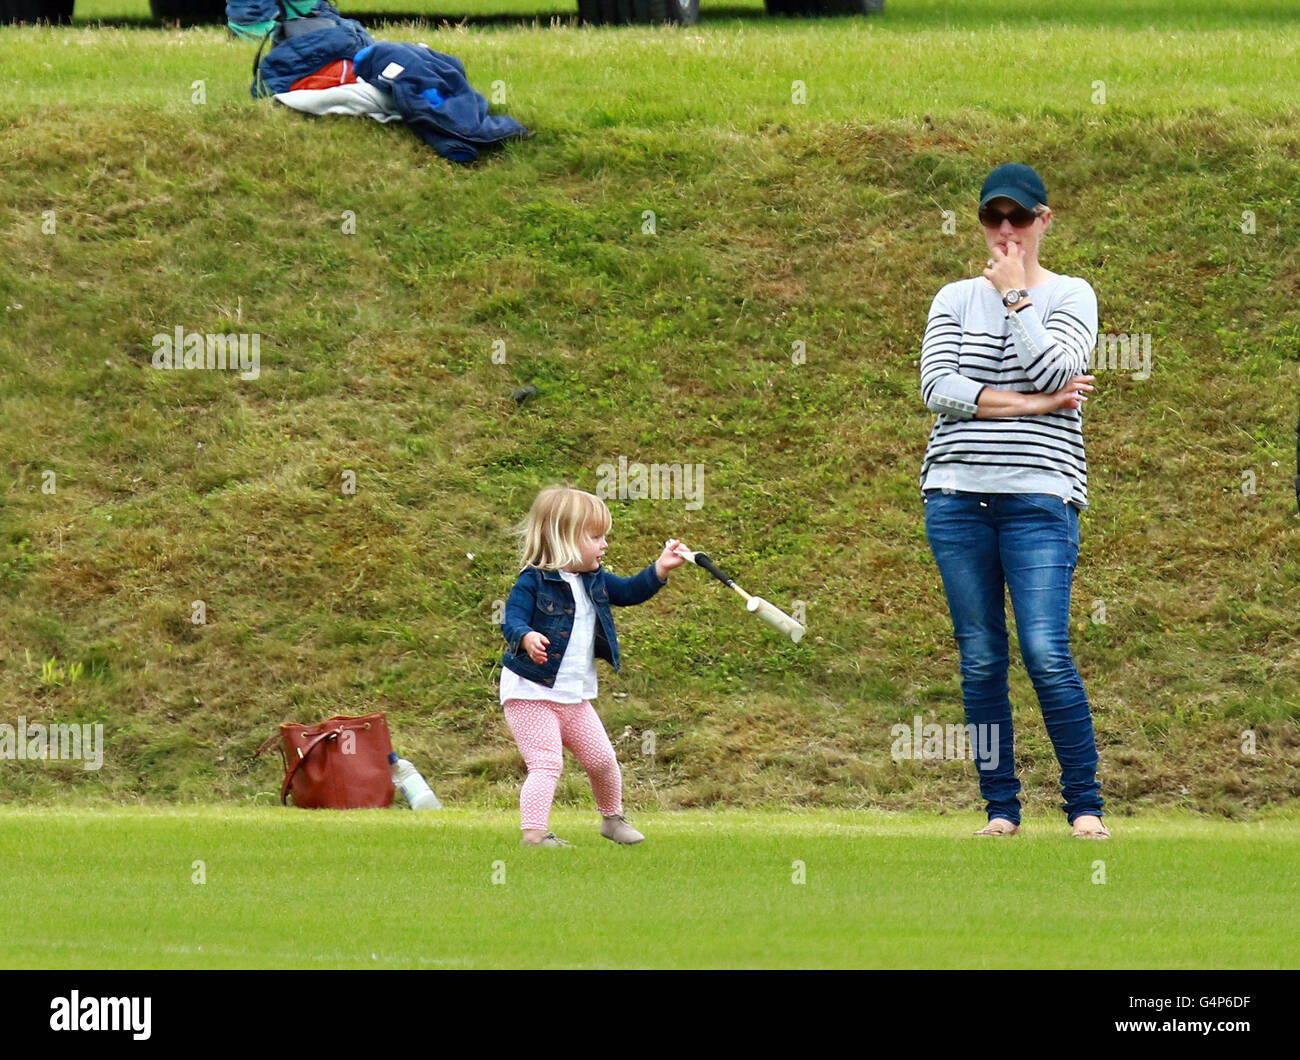 Zara Tindall and Mia . . Tetbury, Gloucestershire . . 18.06.2016 Mia Tindall (2) plays with a polo stick and ball near her mother Zara Tindall (Philips), eldest granddaughter of HM Queen Elizabeth II. Her Uncle, Prince William, Duke of Cambridge, played polo, and Uncle Prince Harry (of Wales), supported his brother.  Credit:  Paul Marriott/Alamy Live News Stock Photo